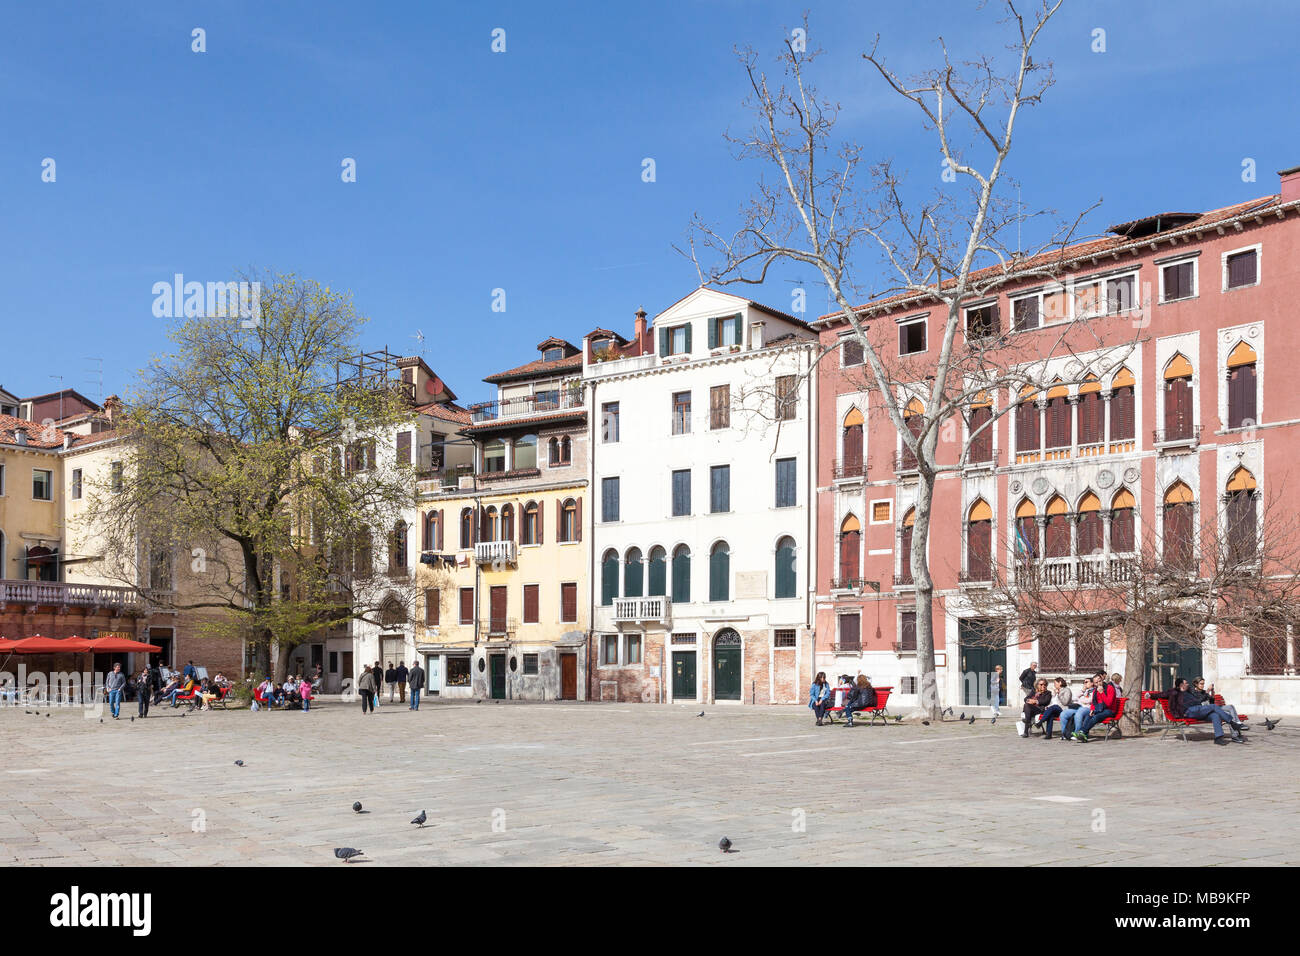 Campo San Polo, San Polo, Venice, Veneto, Italy in spring with local Venetians relaxing on benches in the sunshine under trees Stock Photo